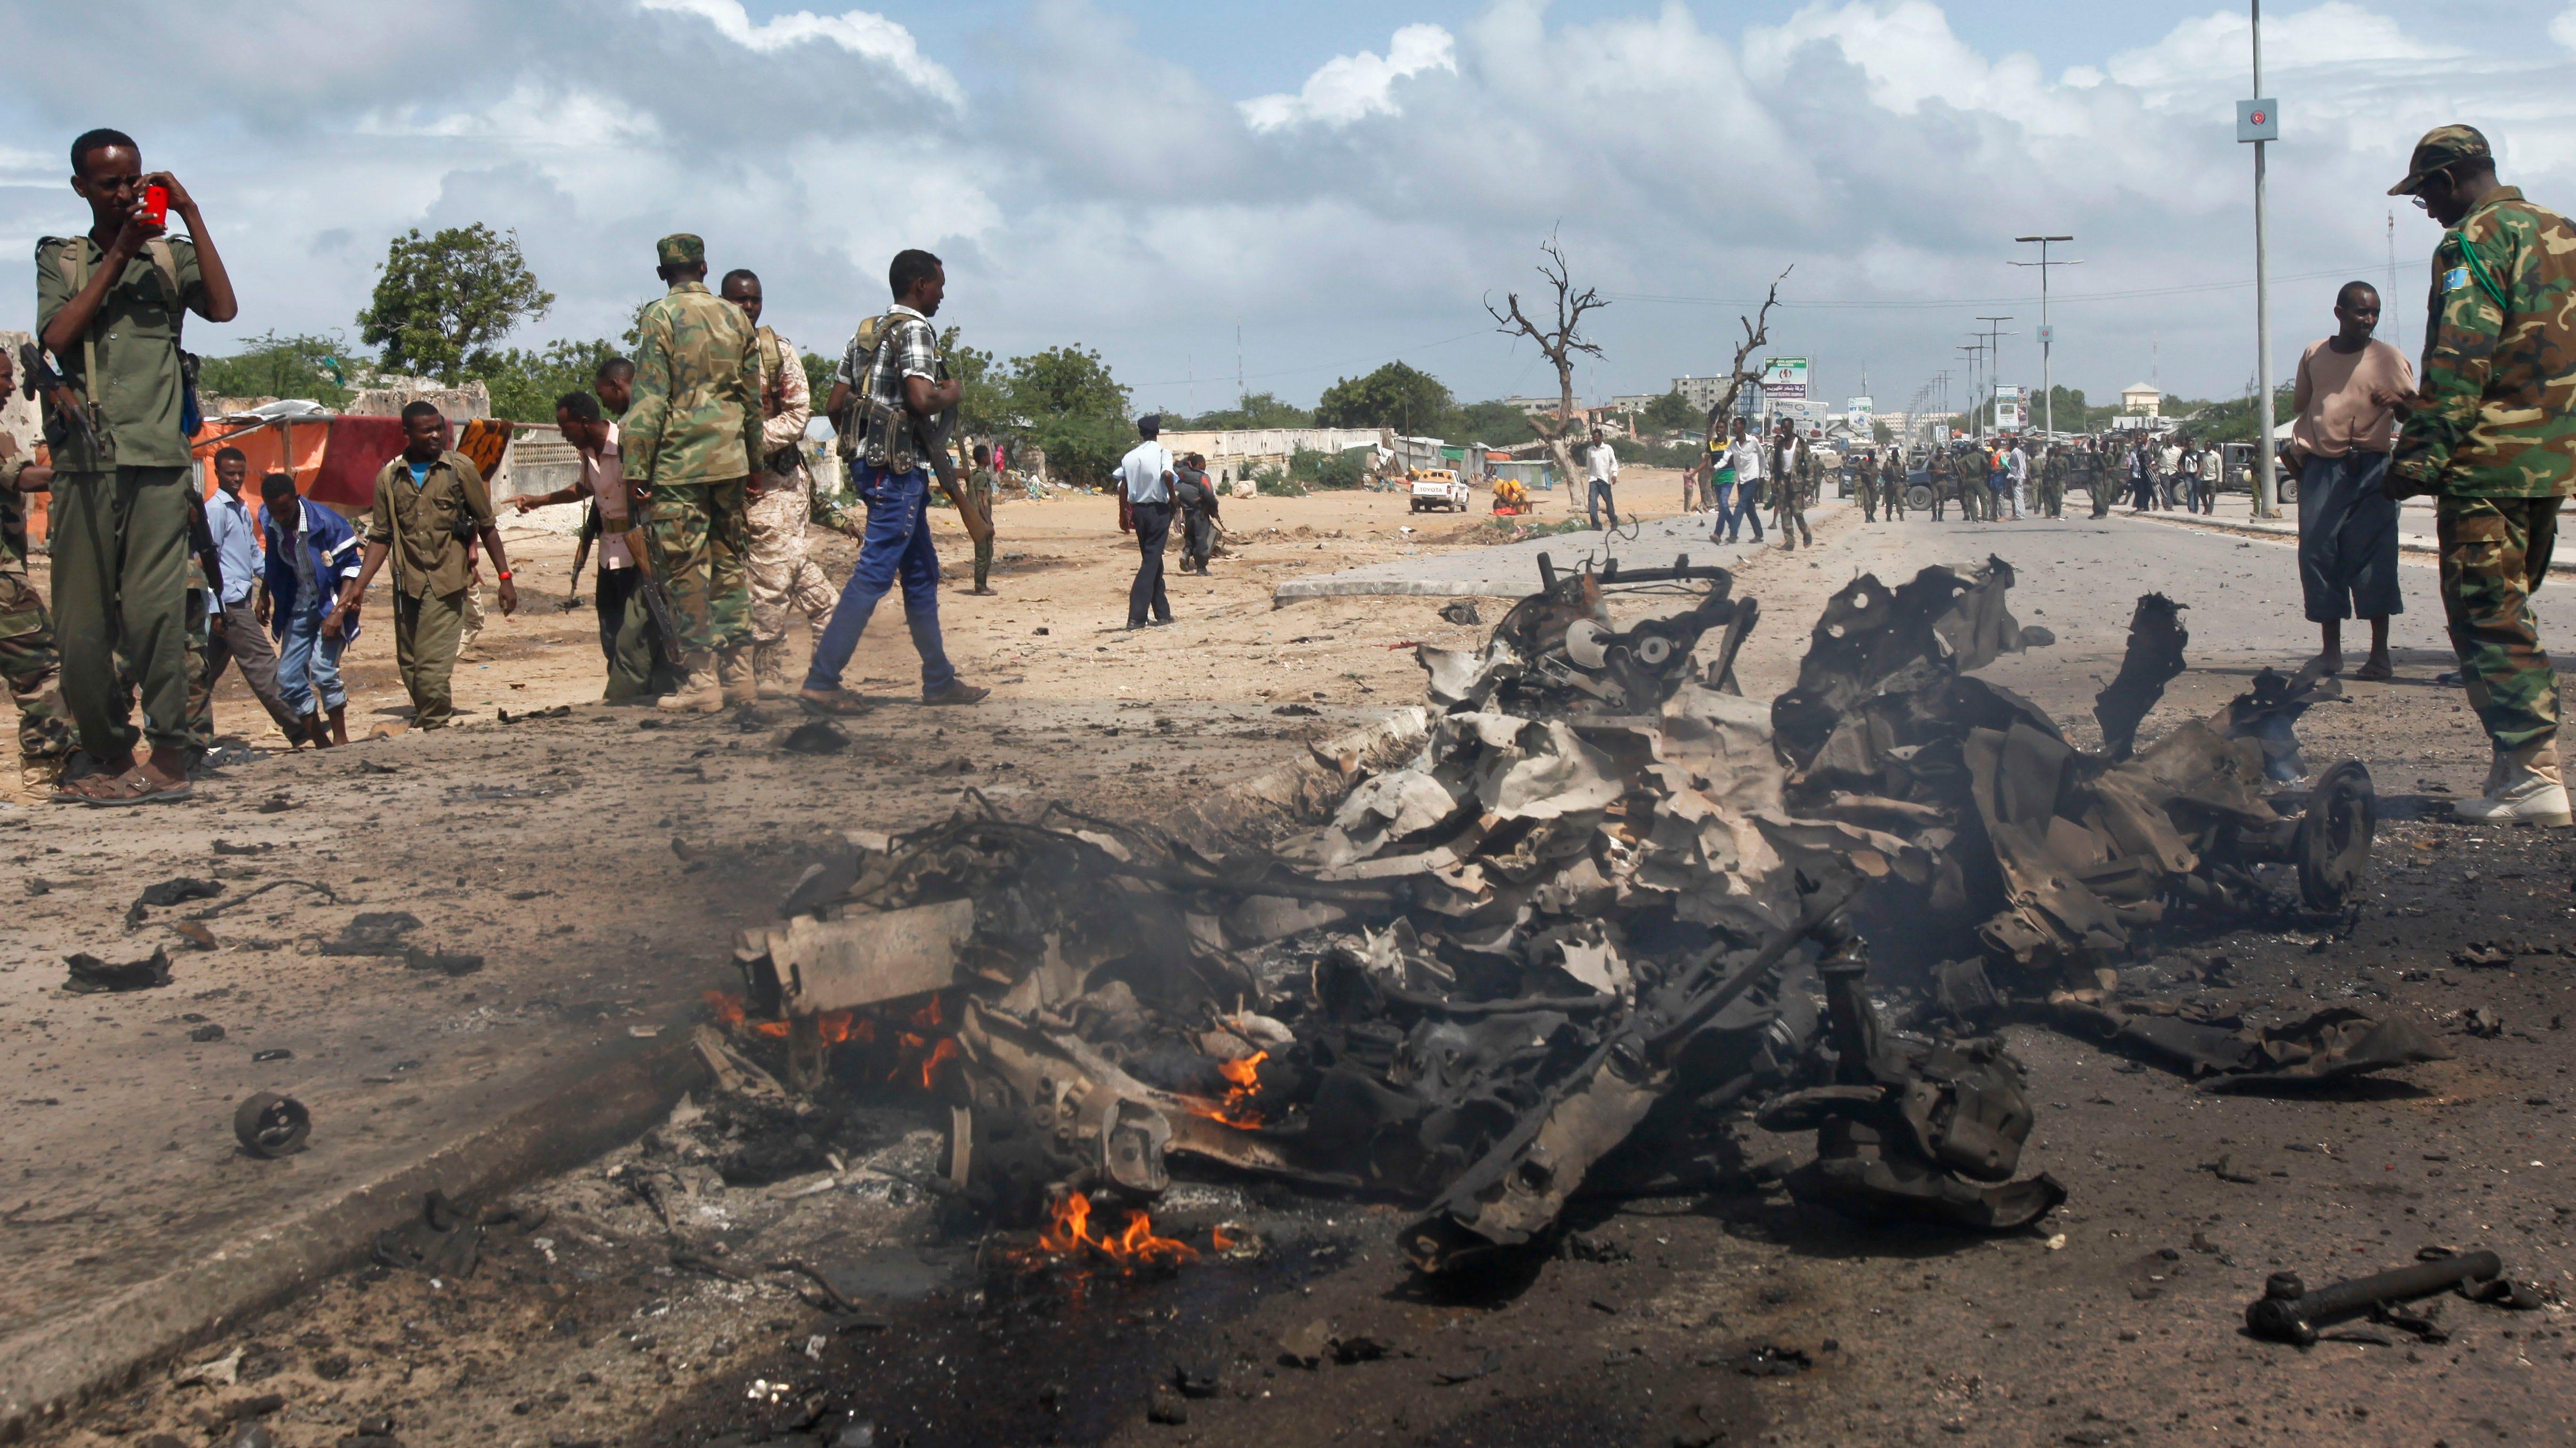 Deadly Battle In Somalia After Attacks By Al-Shabaab